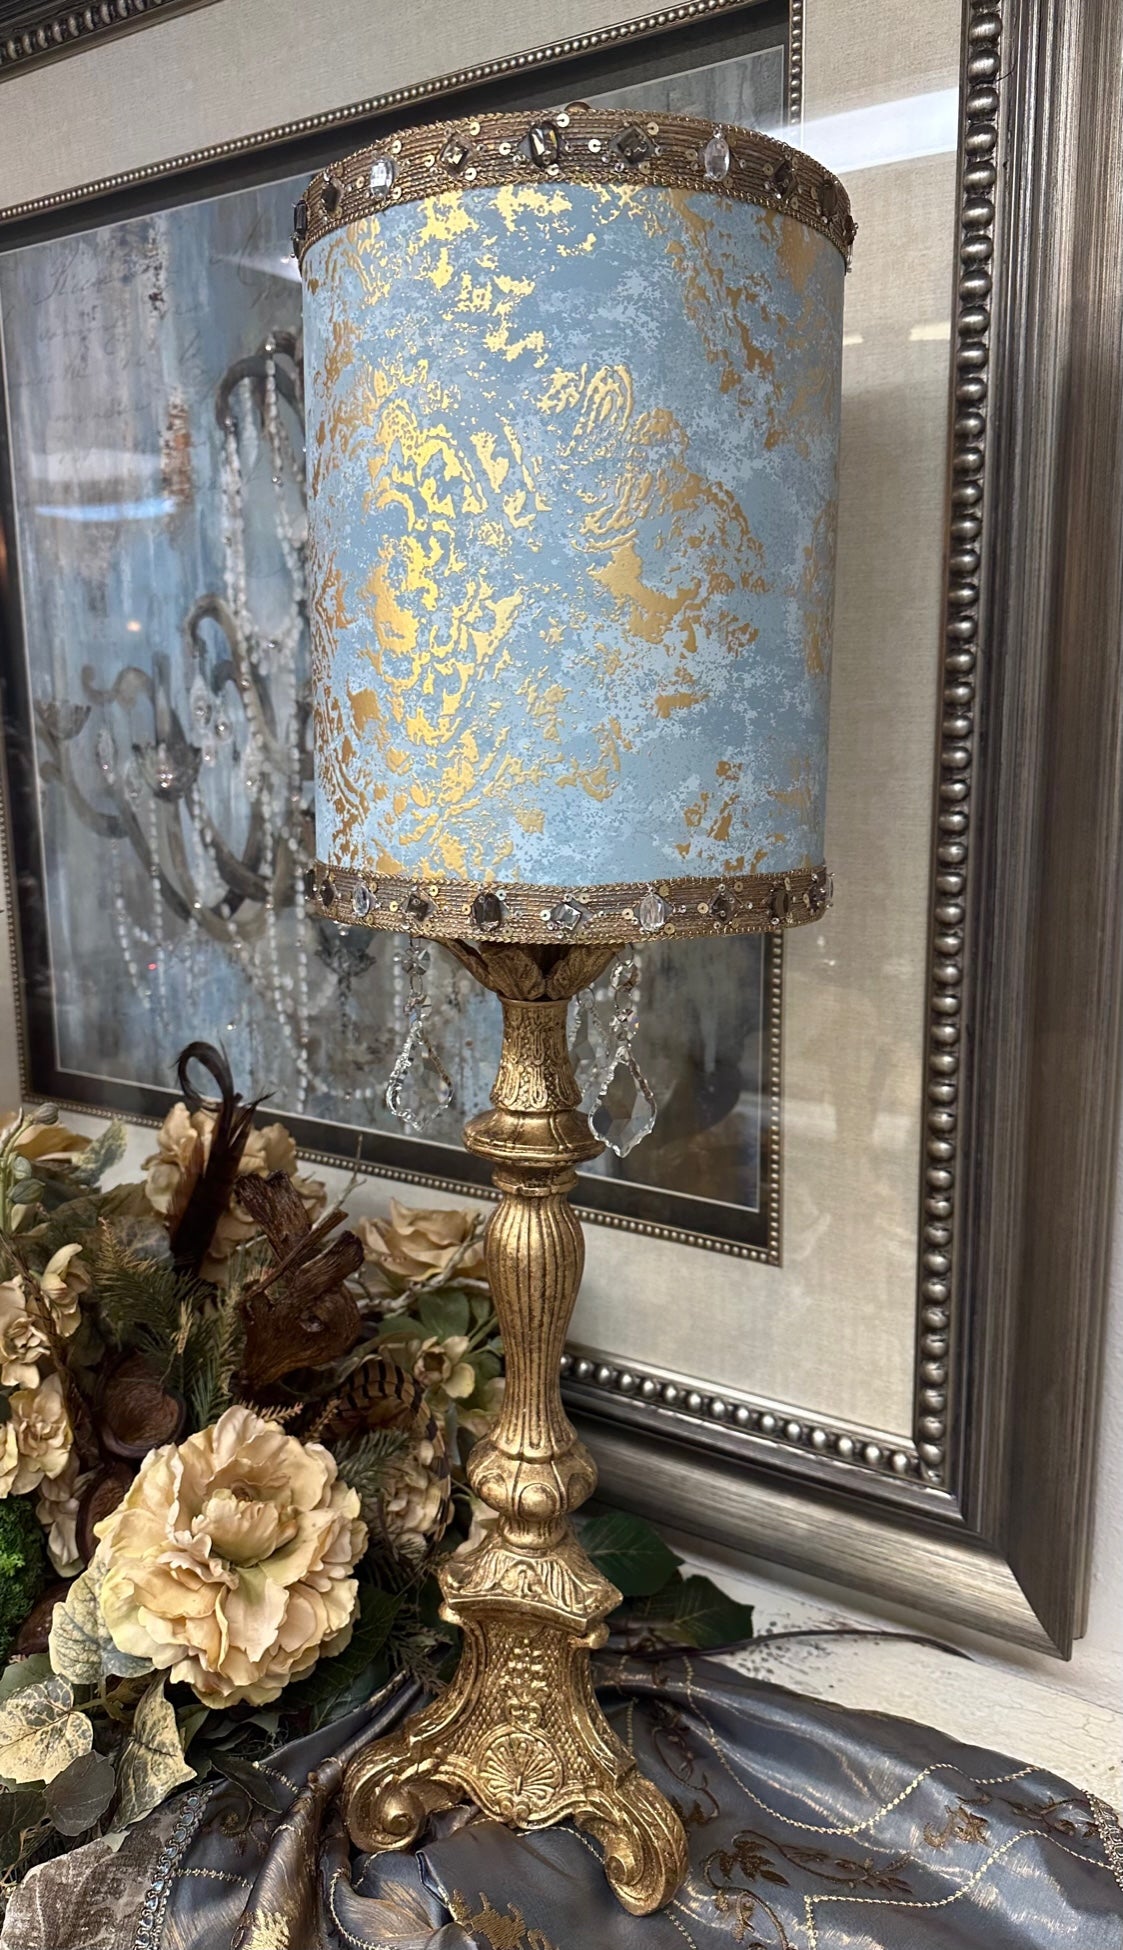 Gallery Designs Table Lamp in Blue and Gold